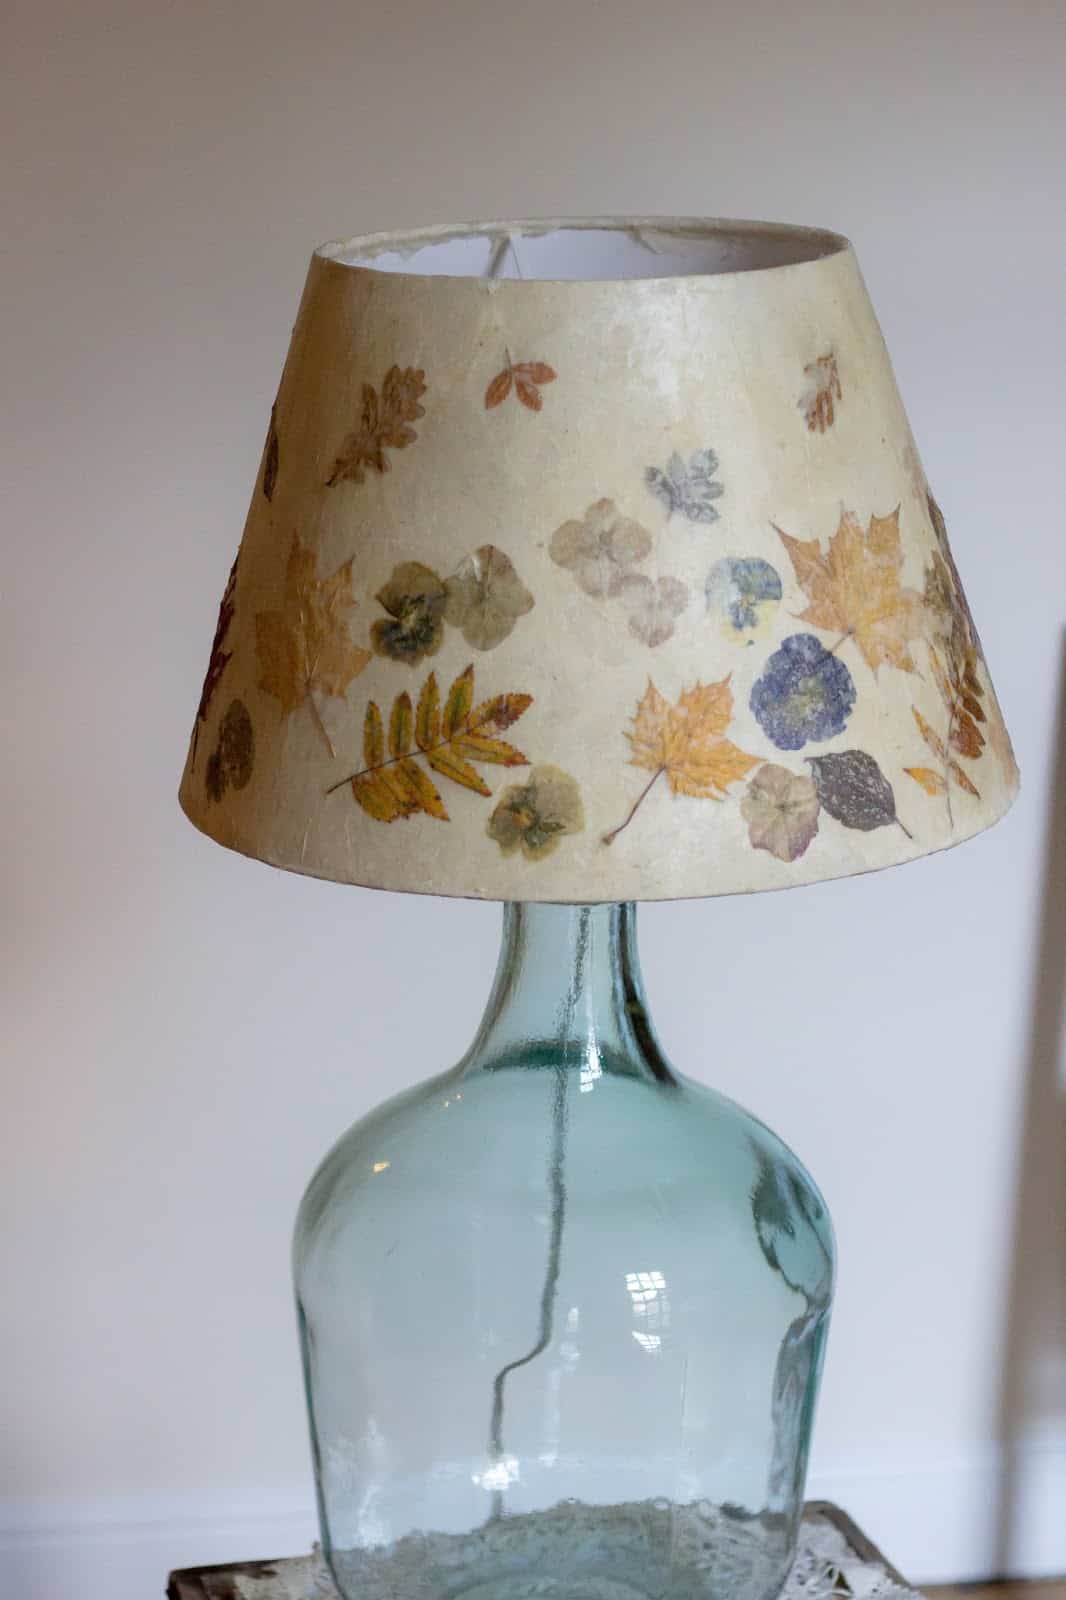 Vintage inspired dried flower lampshade